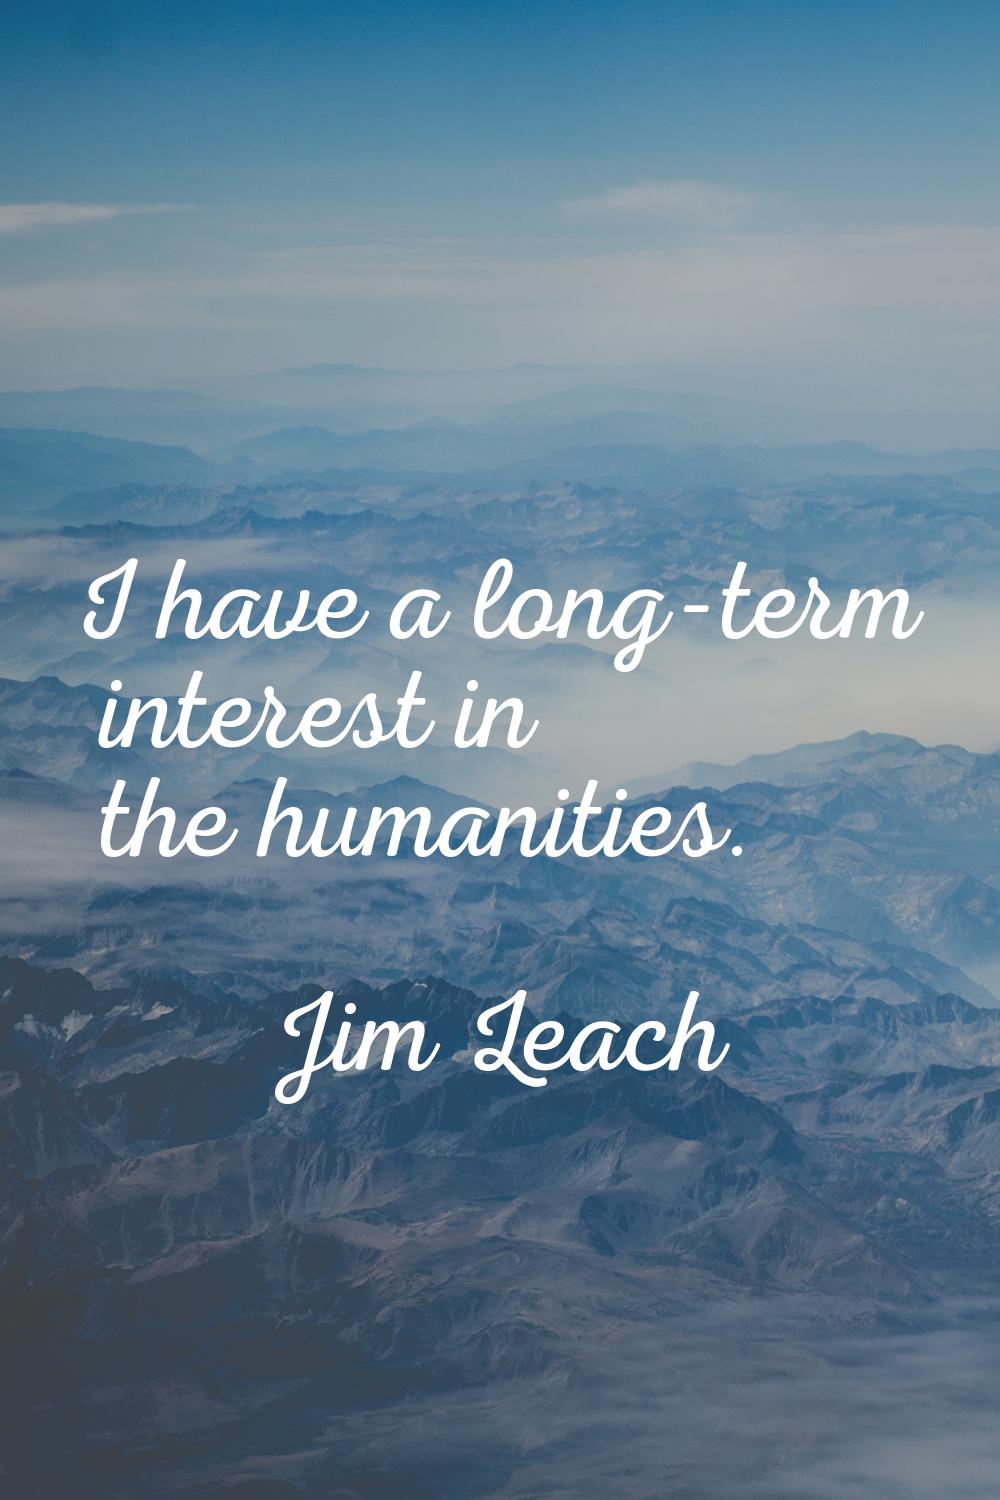 I have a long-term interest in the humanities.